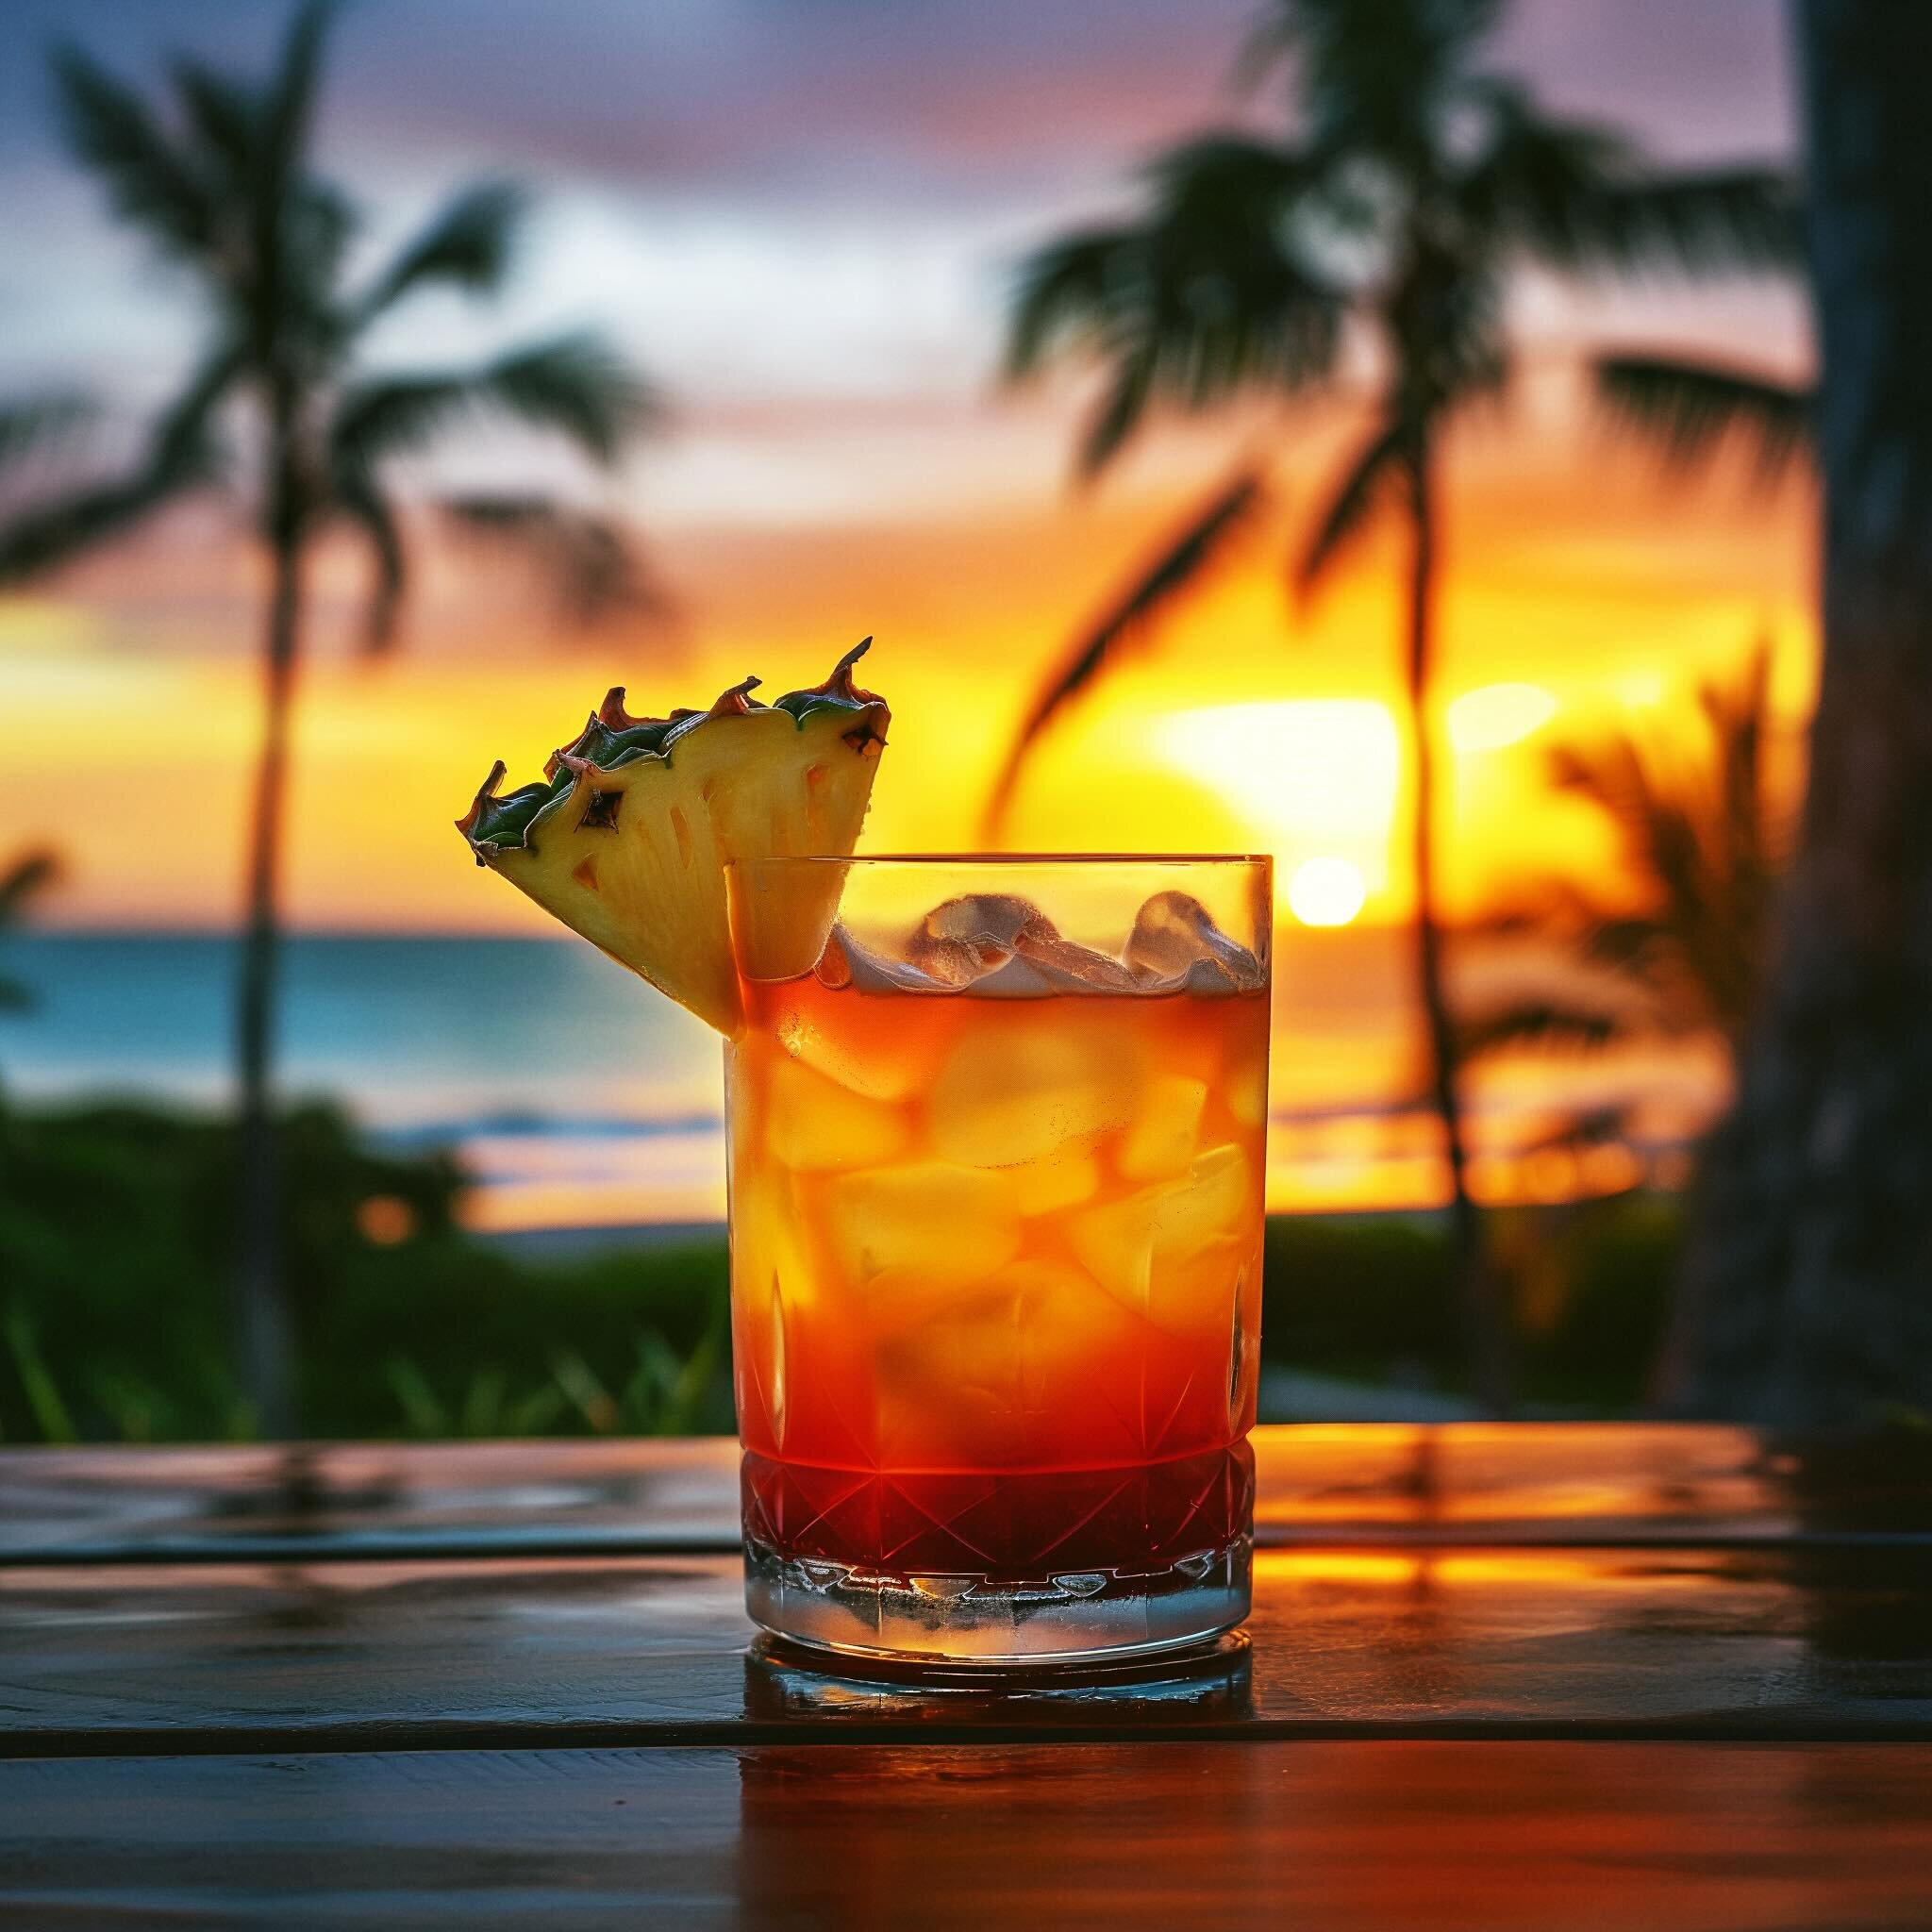 Sunsets and sips, this paradise has no end. Living in the moment and soaking up every delicious detail. Have a great weekend, friends! #paradisefound #weekendmode #cocktailsanddreams